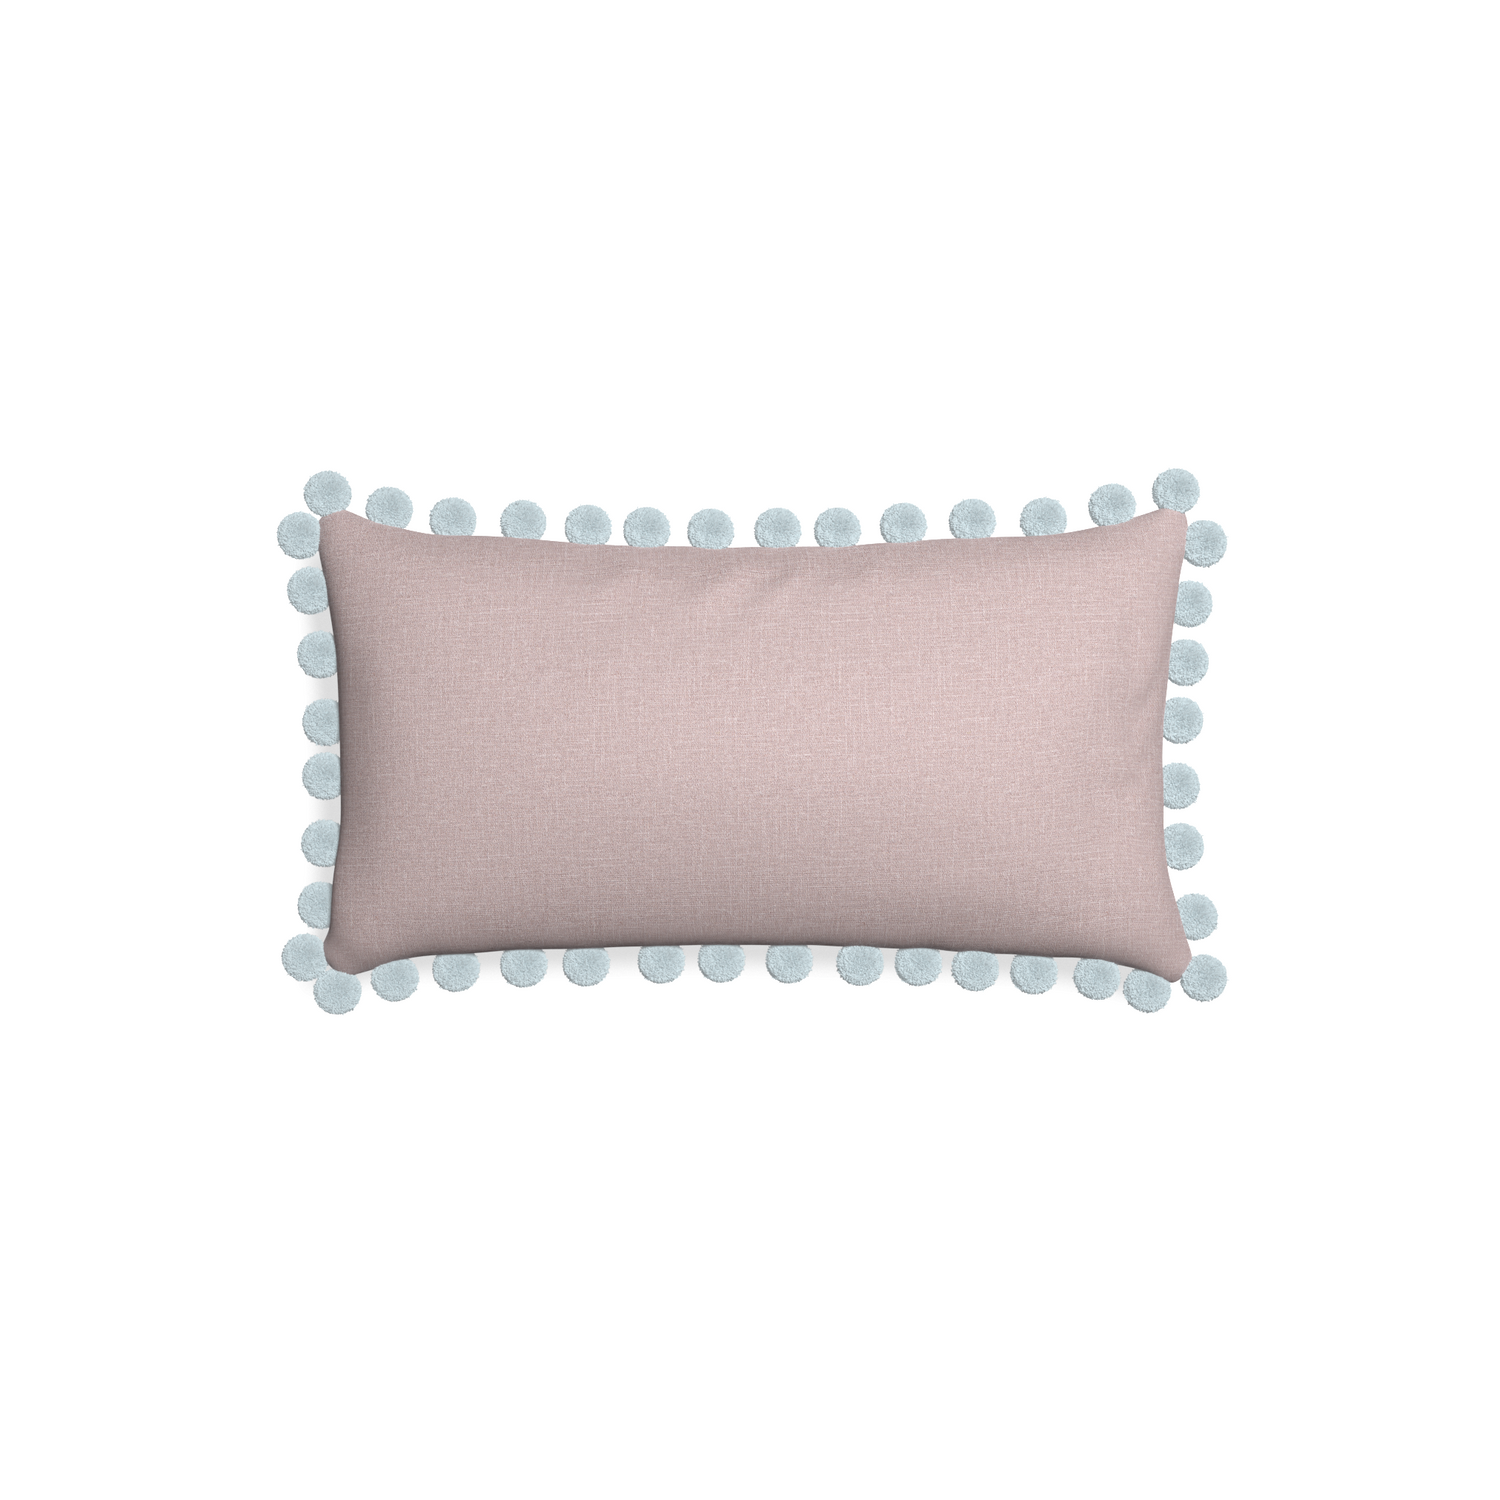 Petite-lumbar orchid custom mauve pinkpillow with powder pom pom on white background